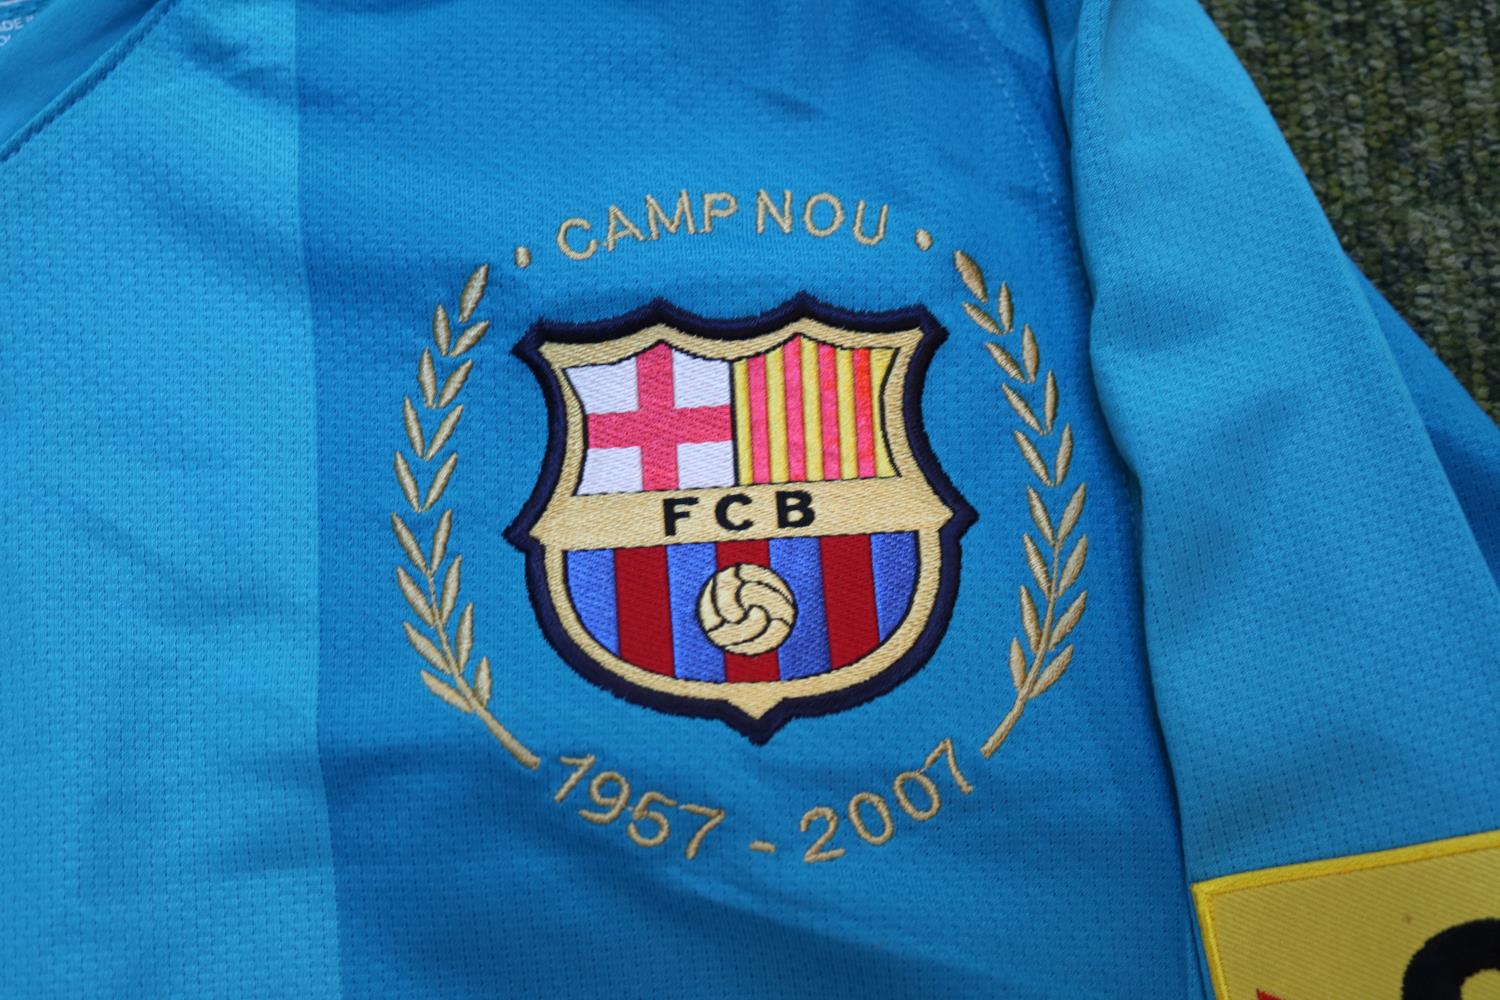 LIONEL MESSI 2008/2009 MATCH WORN #19 BARCELONA AWAY JERSEY Lionel Messi wore this number "19" - Image 3 of 9